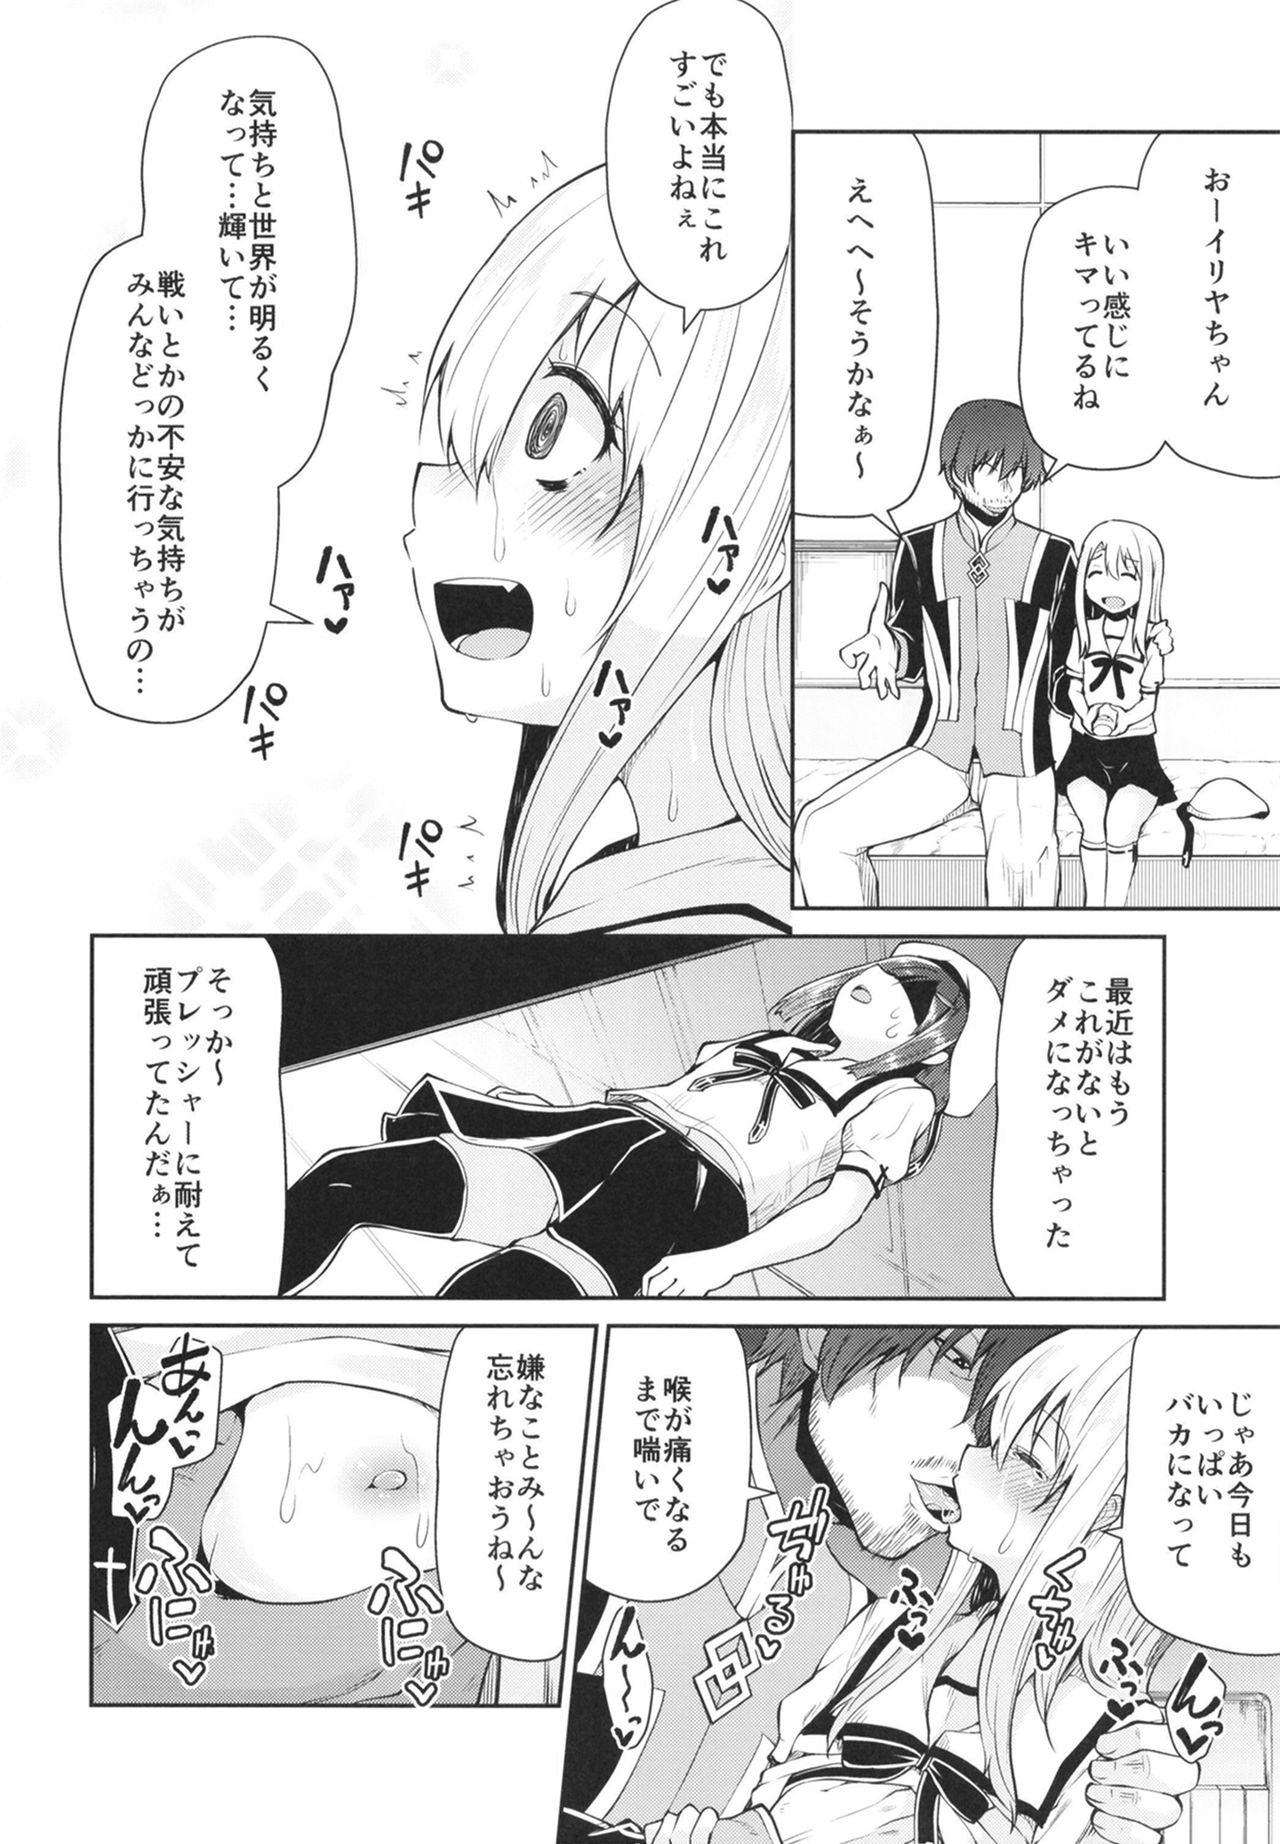 [Kitsuneya (Leafy)] Mahou Shoujo to Shiawase Game - Magical Girl and Happiness Game (Fate/Grand Order, Fate/kaleid liner Prisma Illya) [Digital] page 6 full